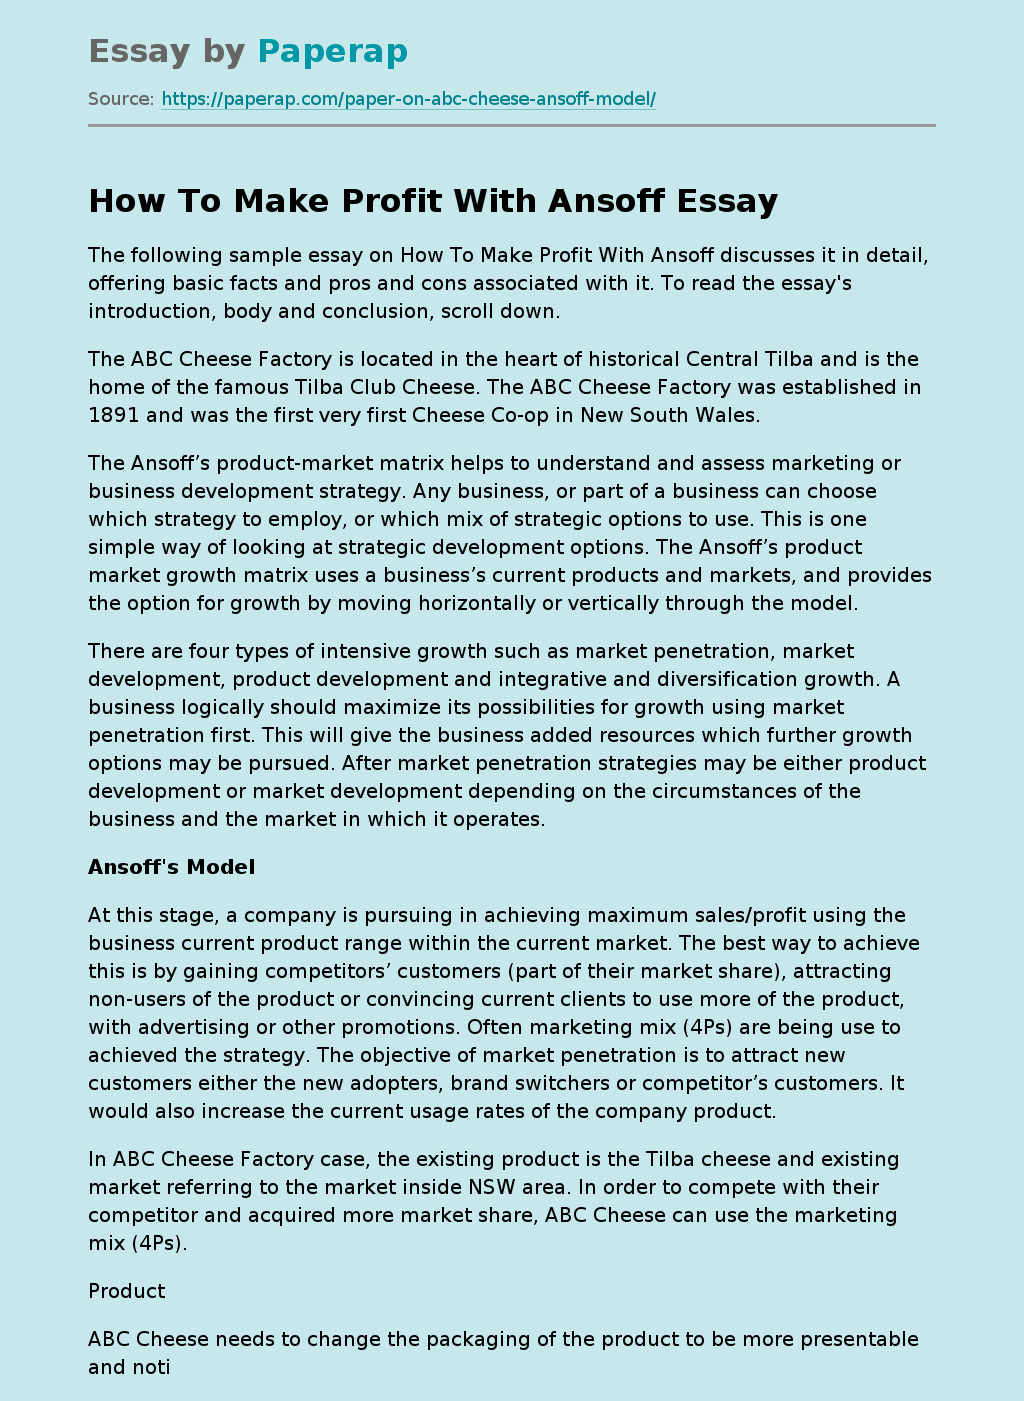 How To Make Profit With Ansoff?